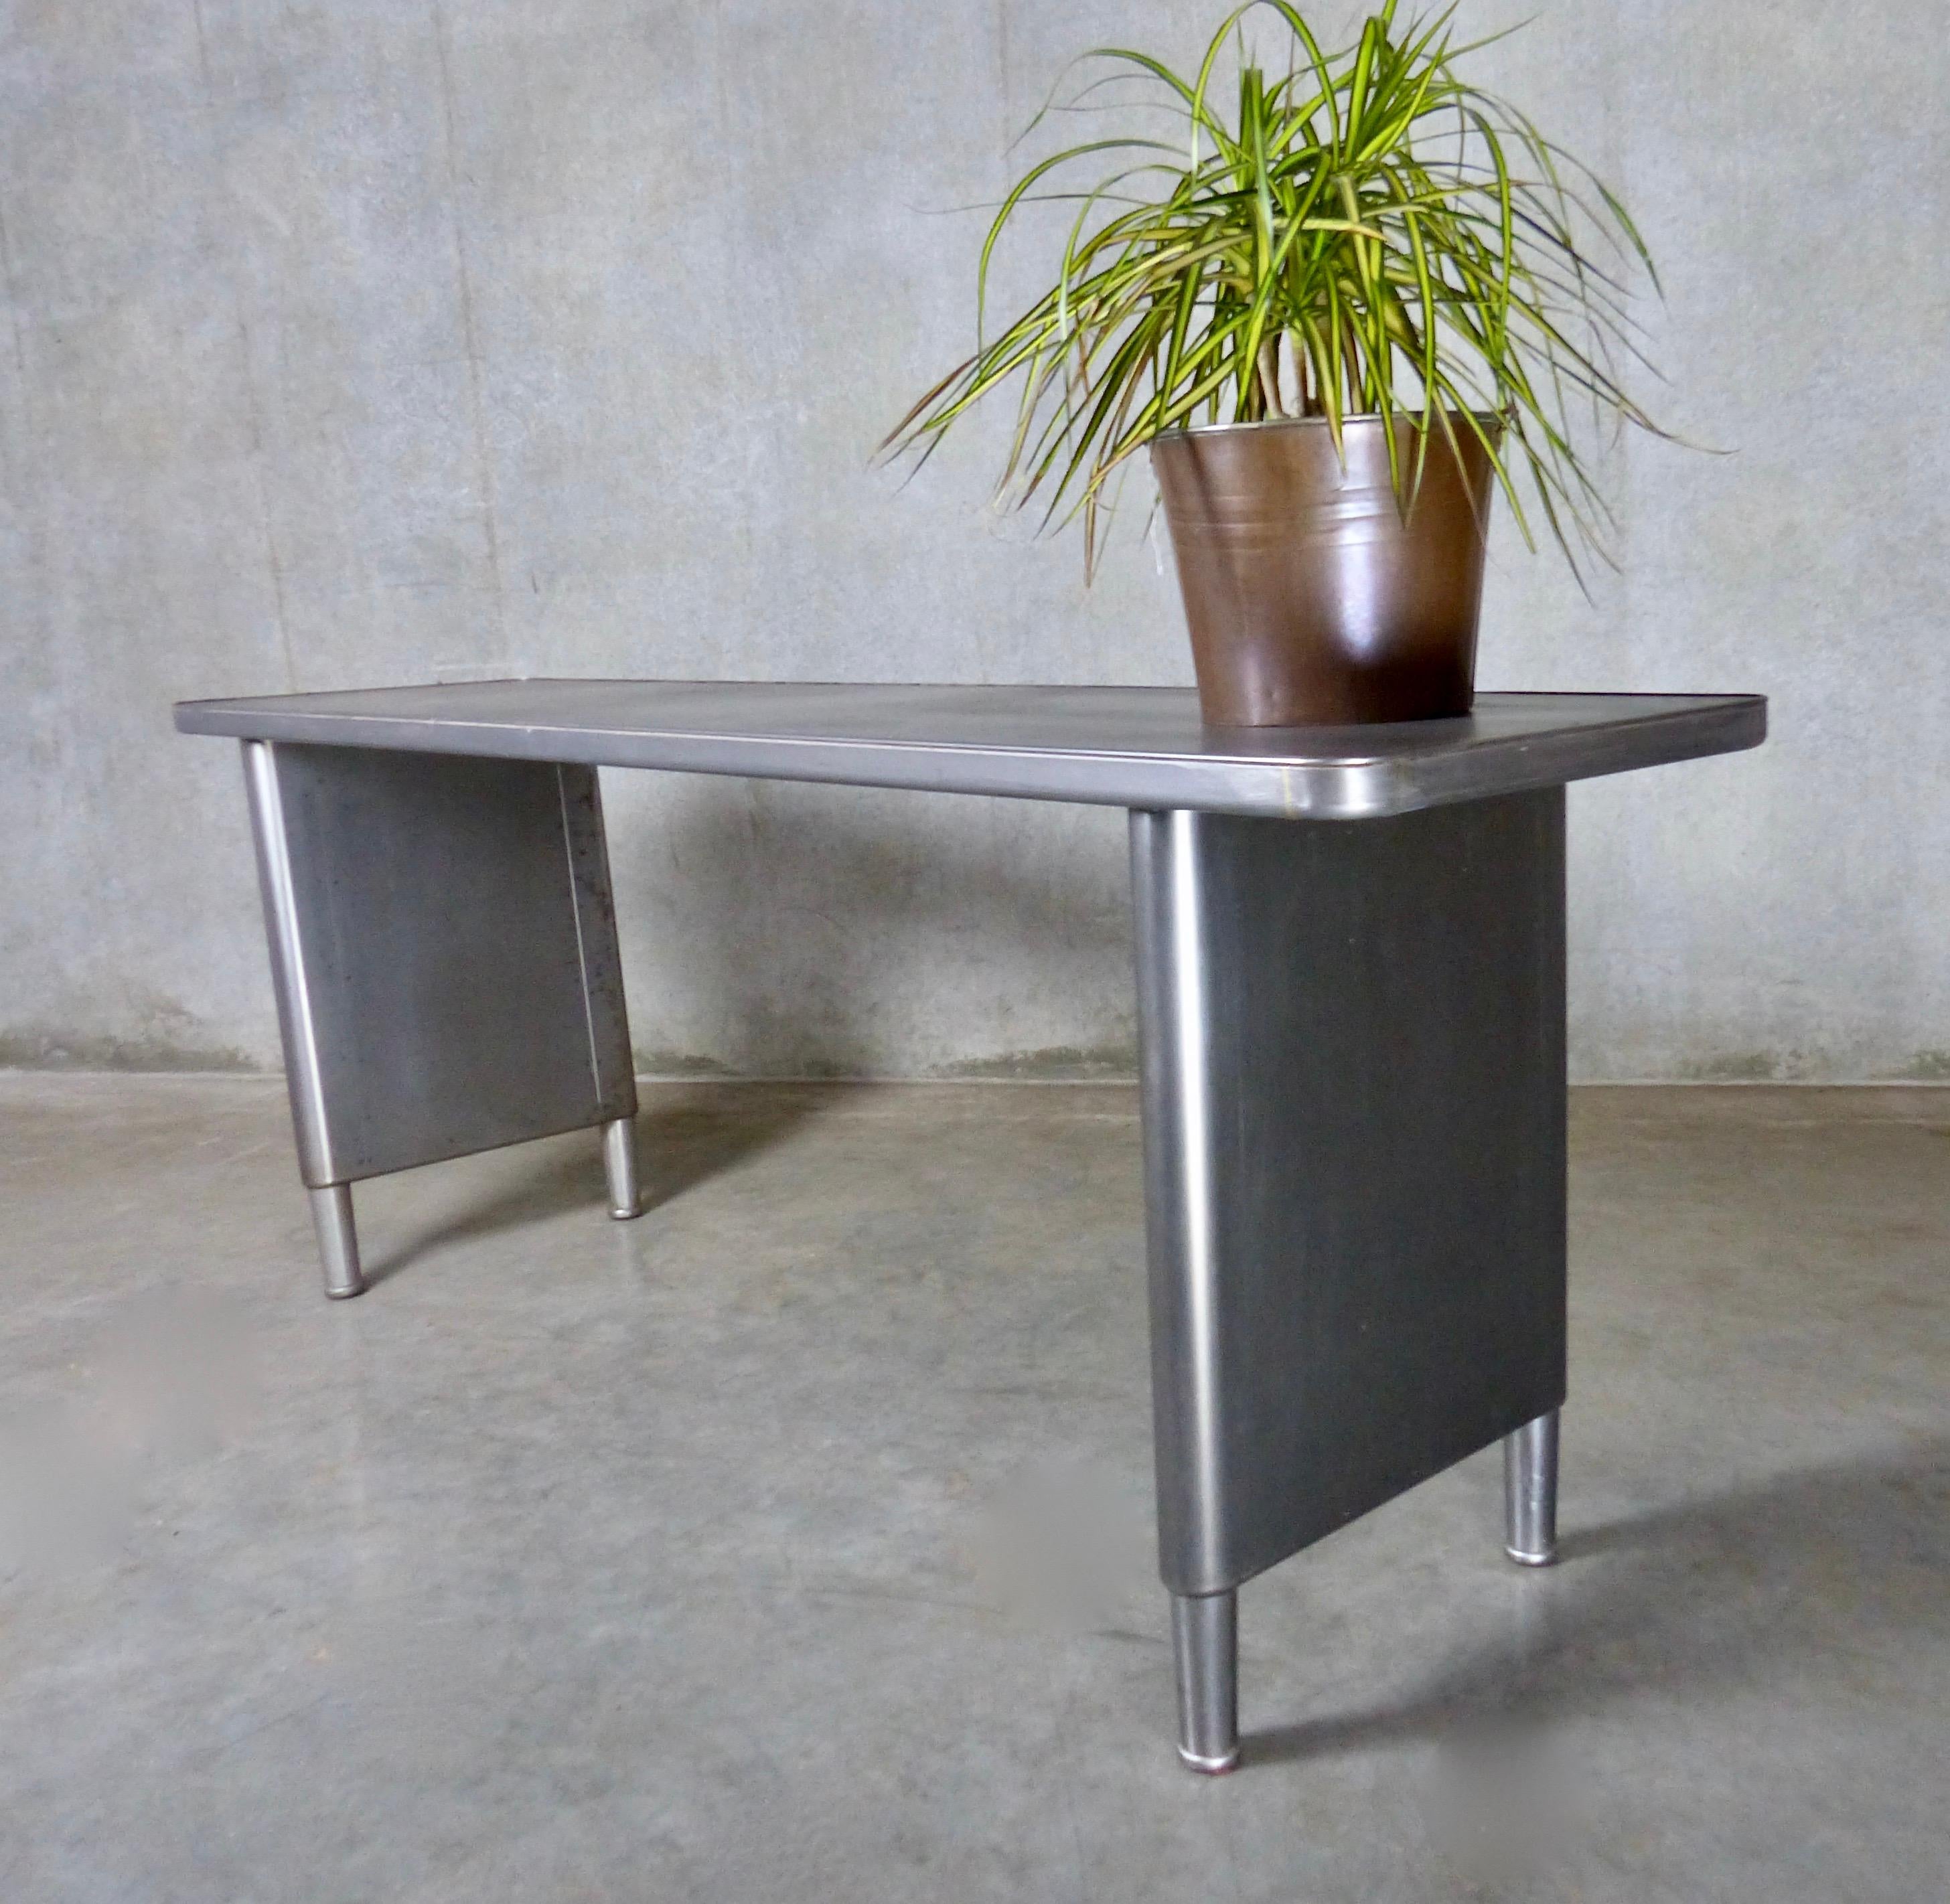 A raw metal office/work table from circa 1940 that makes a great console, hall, or dining table. Panel steel legs can be moved toward the centre of the table to allow people to sit comfortably at its ends. Great piece of industrial design that’s